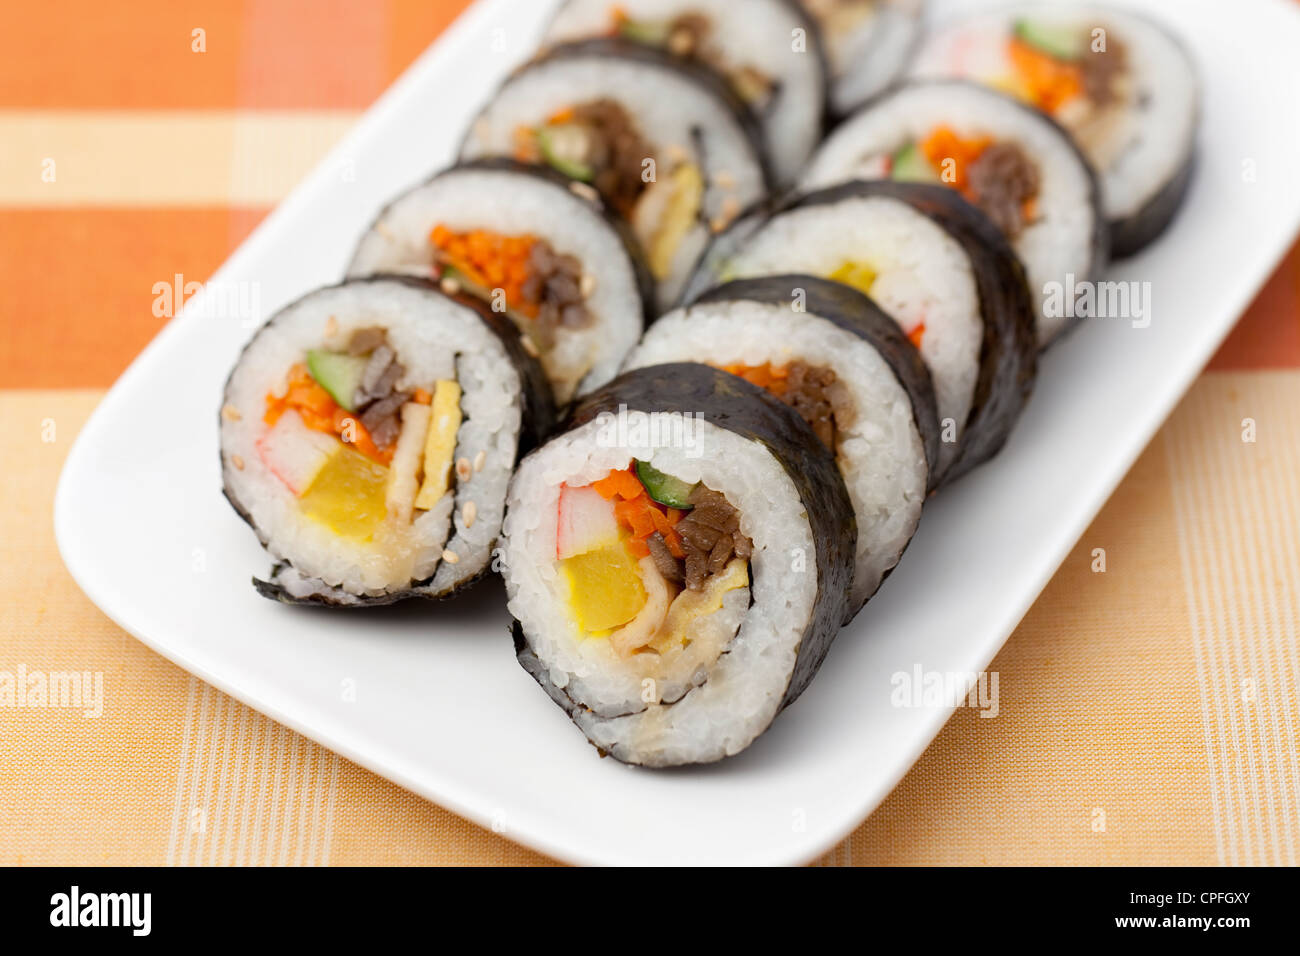 Gimbap, a Korean dish made from rice and other ingredients rolled in seaweed. Stock Photo